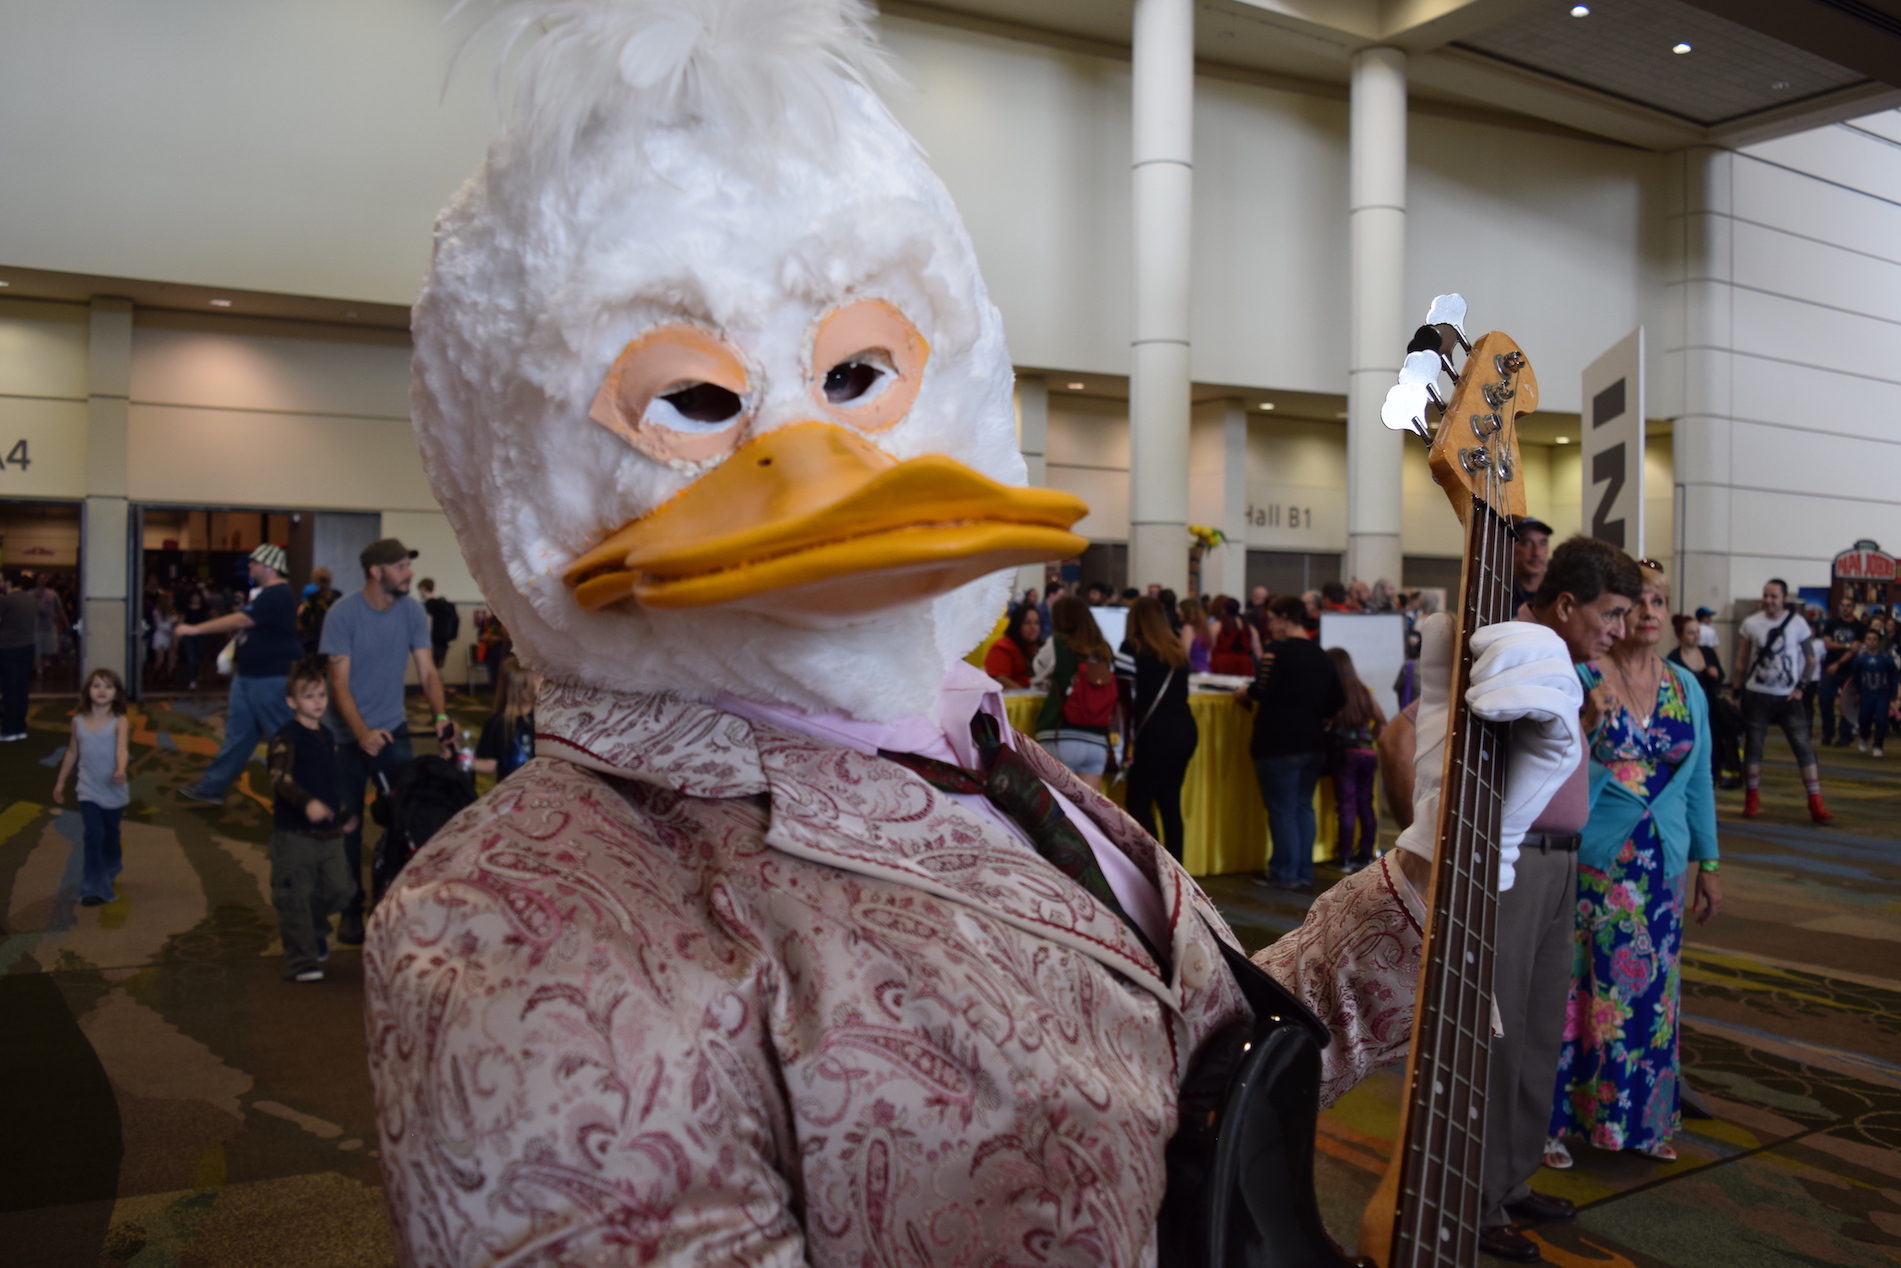 Howard the Duck rocking the guitar in style. \ Image: Dakster Sullivan